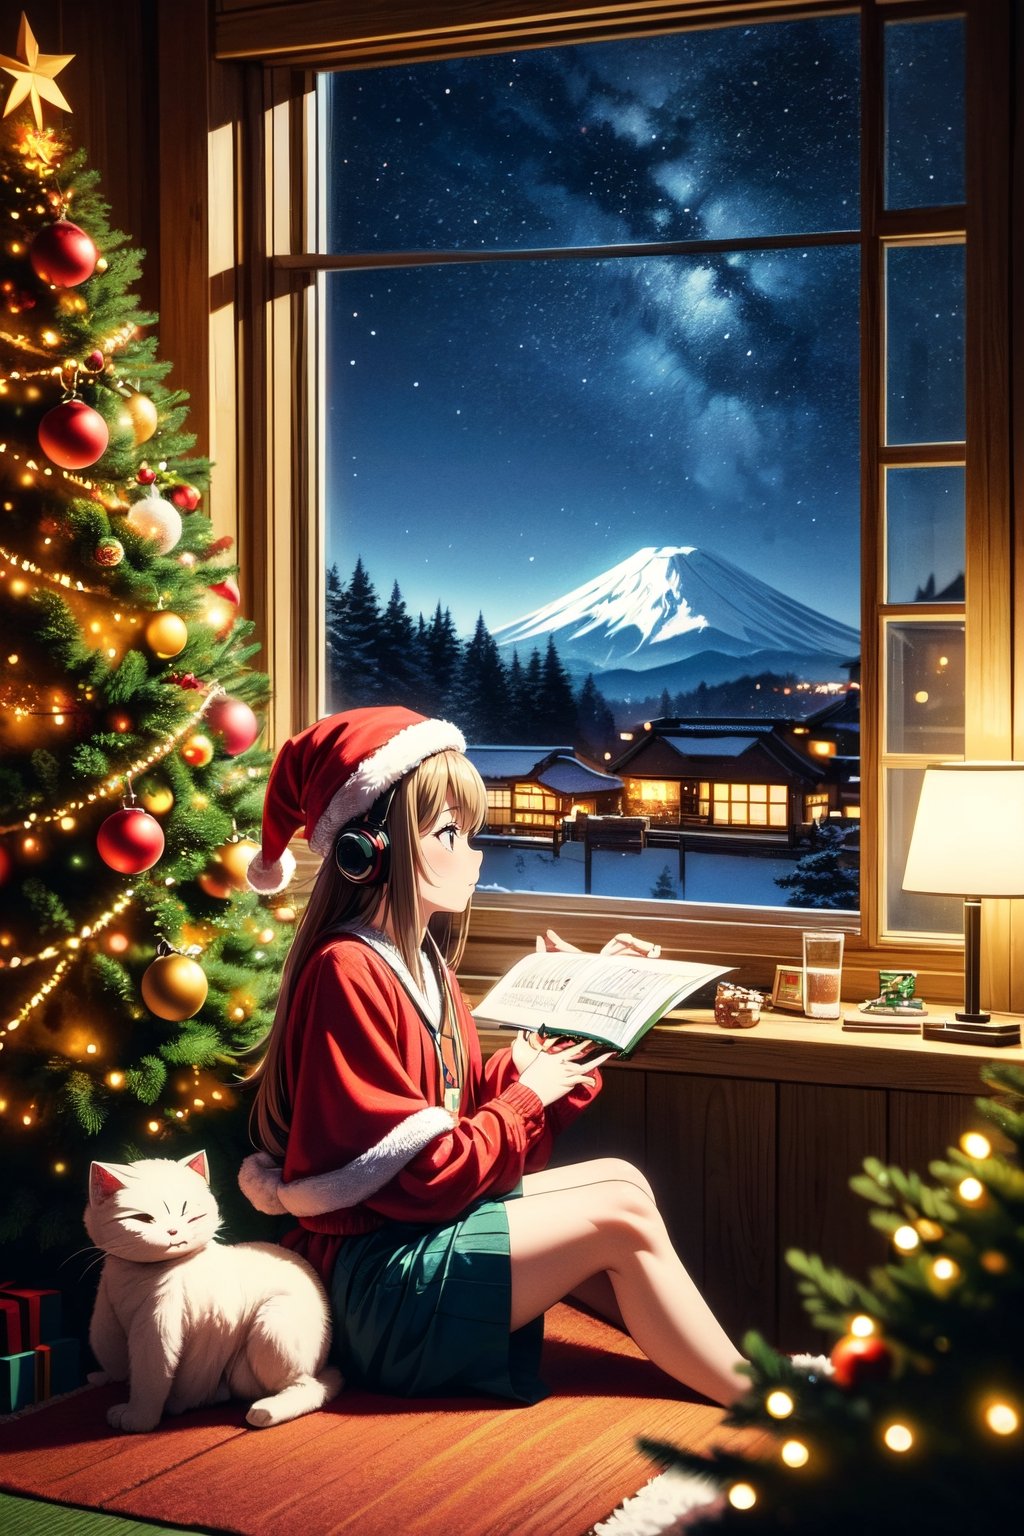 An illustration of a LOFI girl in a Christmas atmosphere, studying by a window in the early morning, in a style that can be either semi-realistic or anime. She is shown in profile, looking down at her homework with her right hand writing. She's wearing headphones and a Christmas hat, immersed in her music. Beside her is a Japanese Maneki-neko (lucky cat) with its left paw raised. The room has a cozy, festive ambiance. Outside the window, there's a view of Mount Fuji, a cluster of small houses, and numerous Christmas trees, capturing the essence of a Christmas morning. The image is ideal for a LOFI music background, ,Lofi style